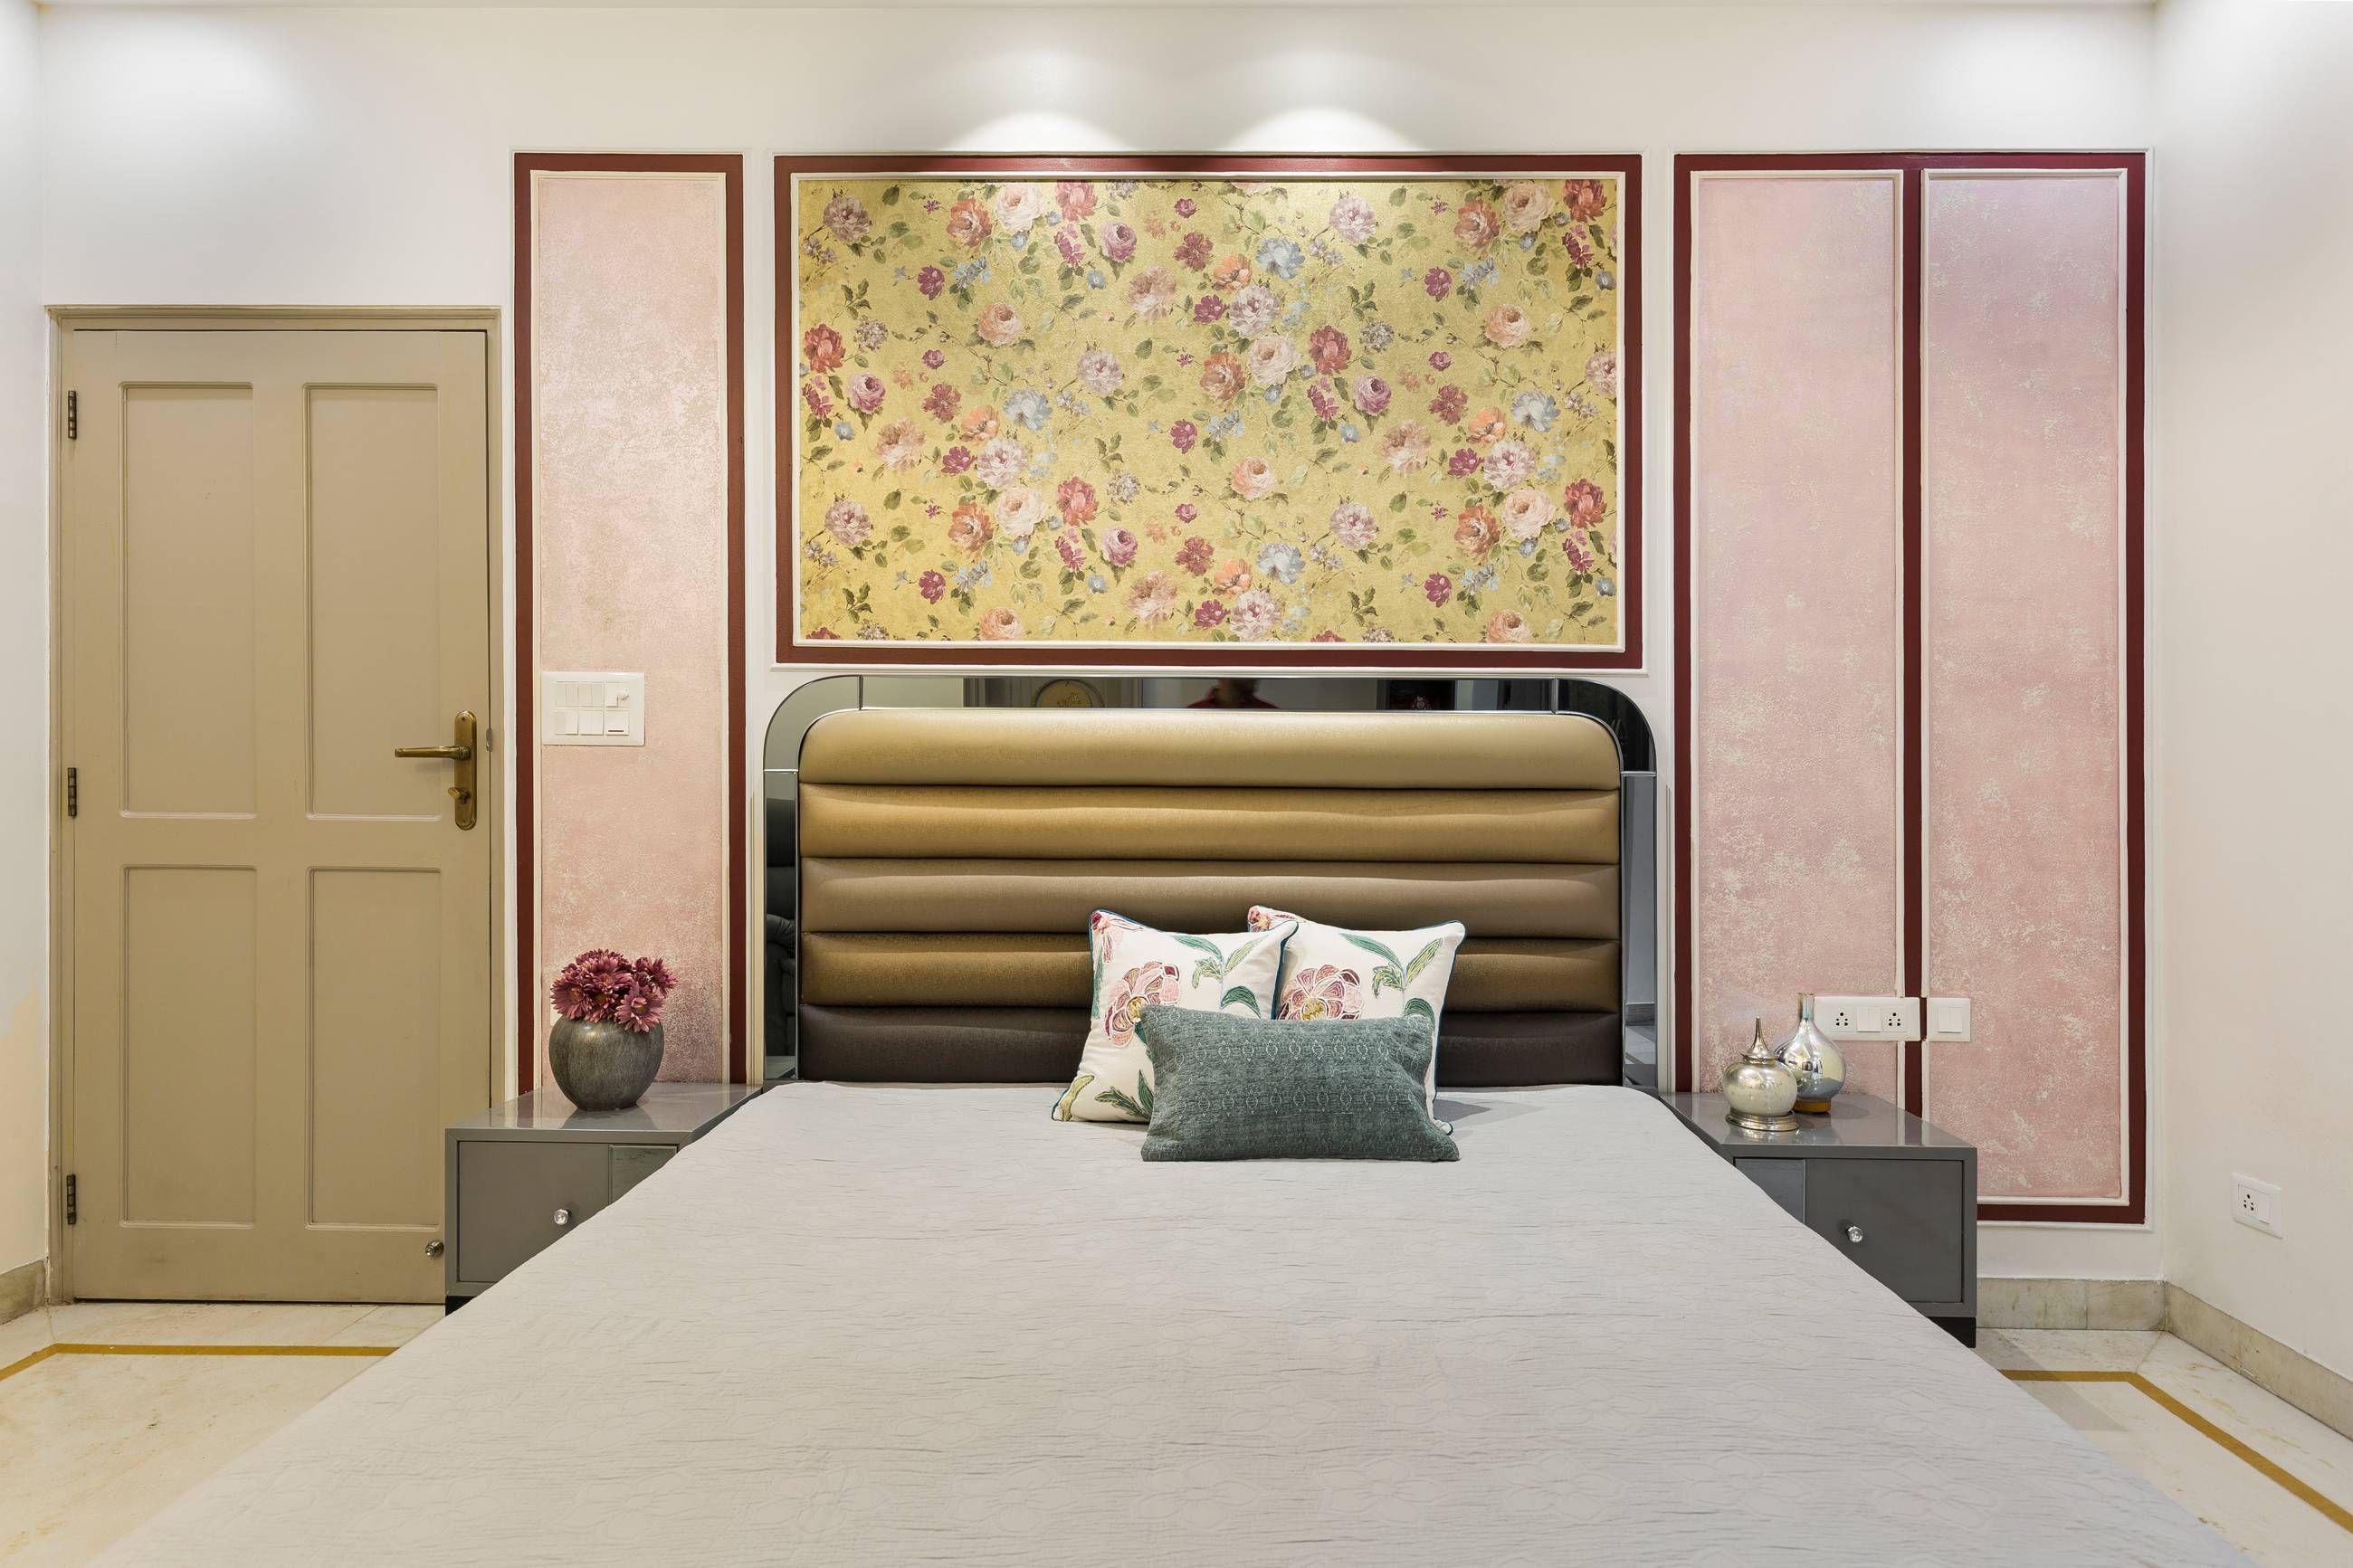 Modern Guest Room Design With Floral Accent Wall